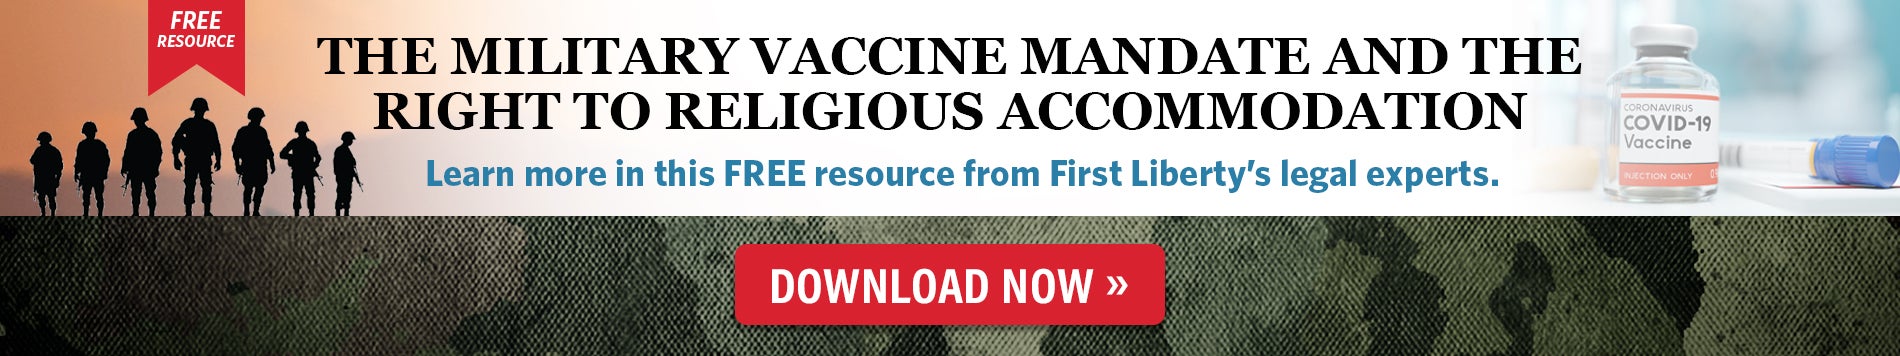 Download Free Military Vaccine Mandate Resource | First Liberty Live